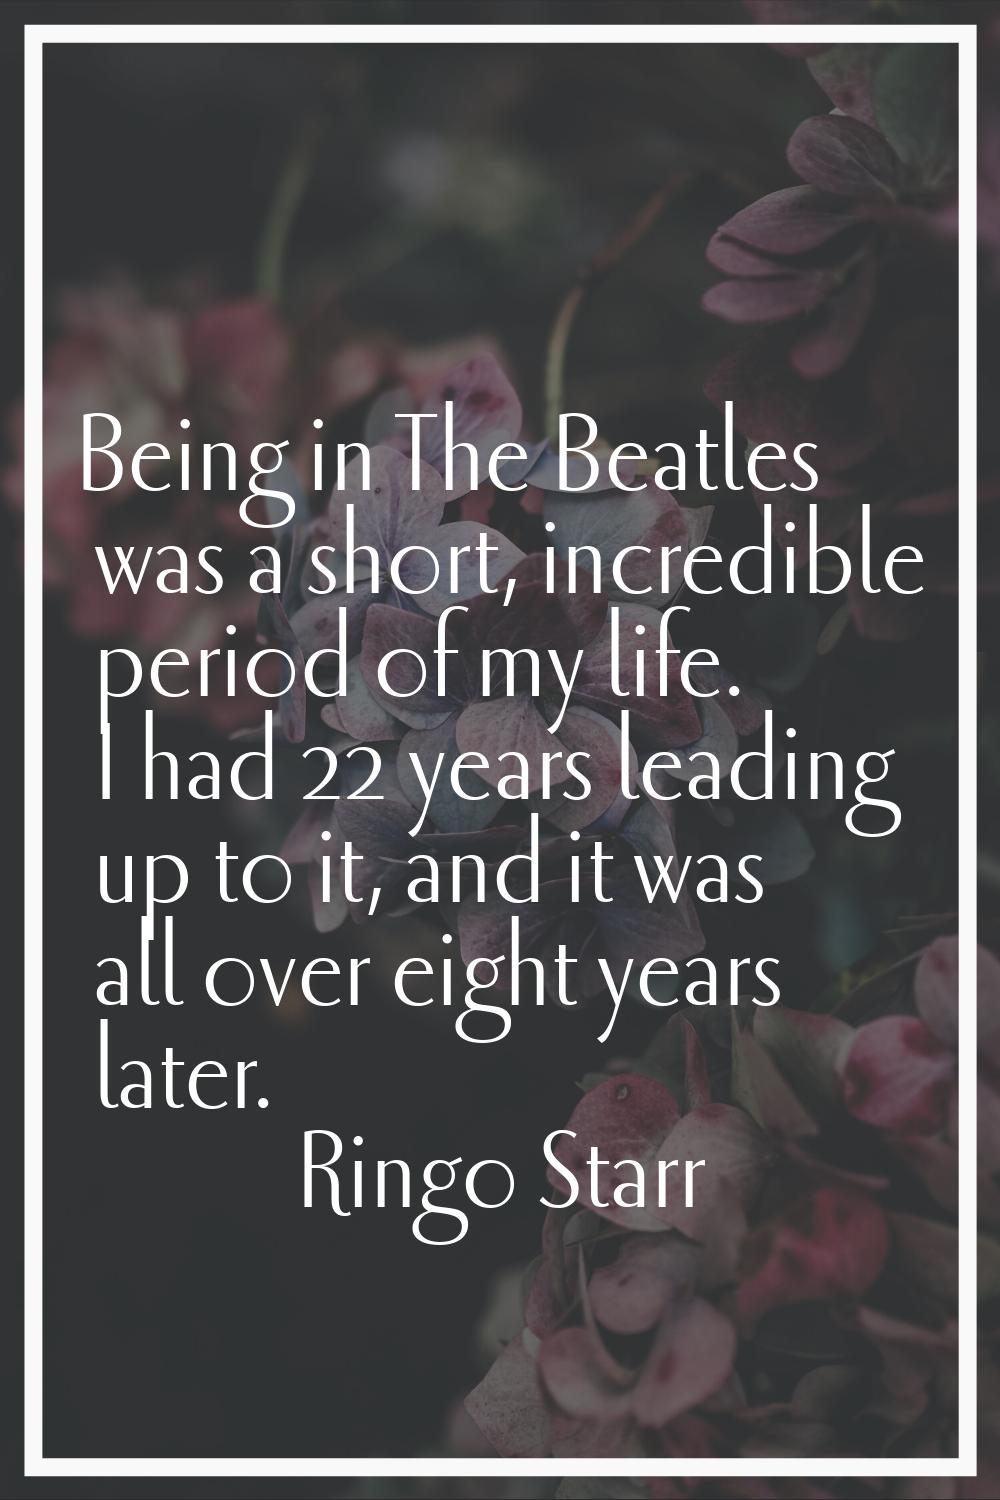 Being in The Beatles was a short, incredible period of my life. I had 22 years leading up to it, an